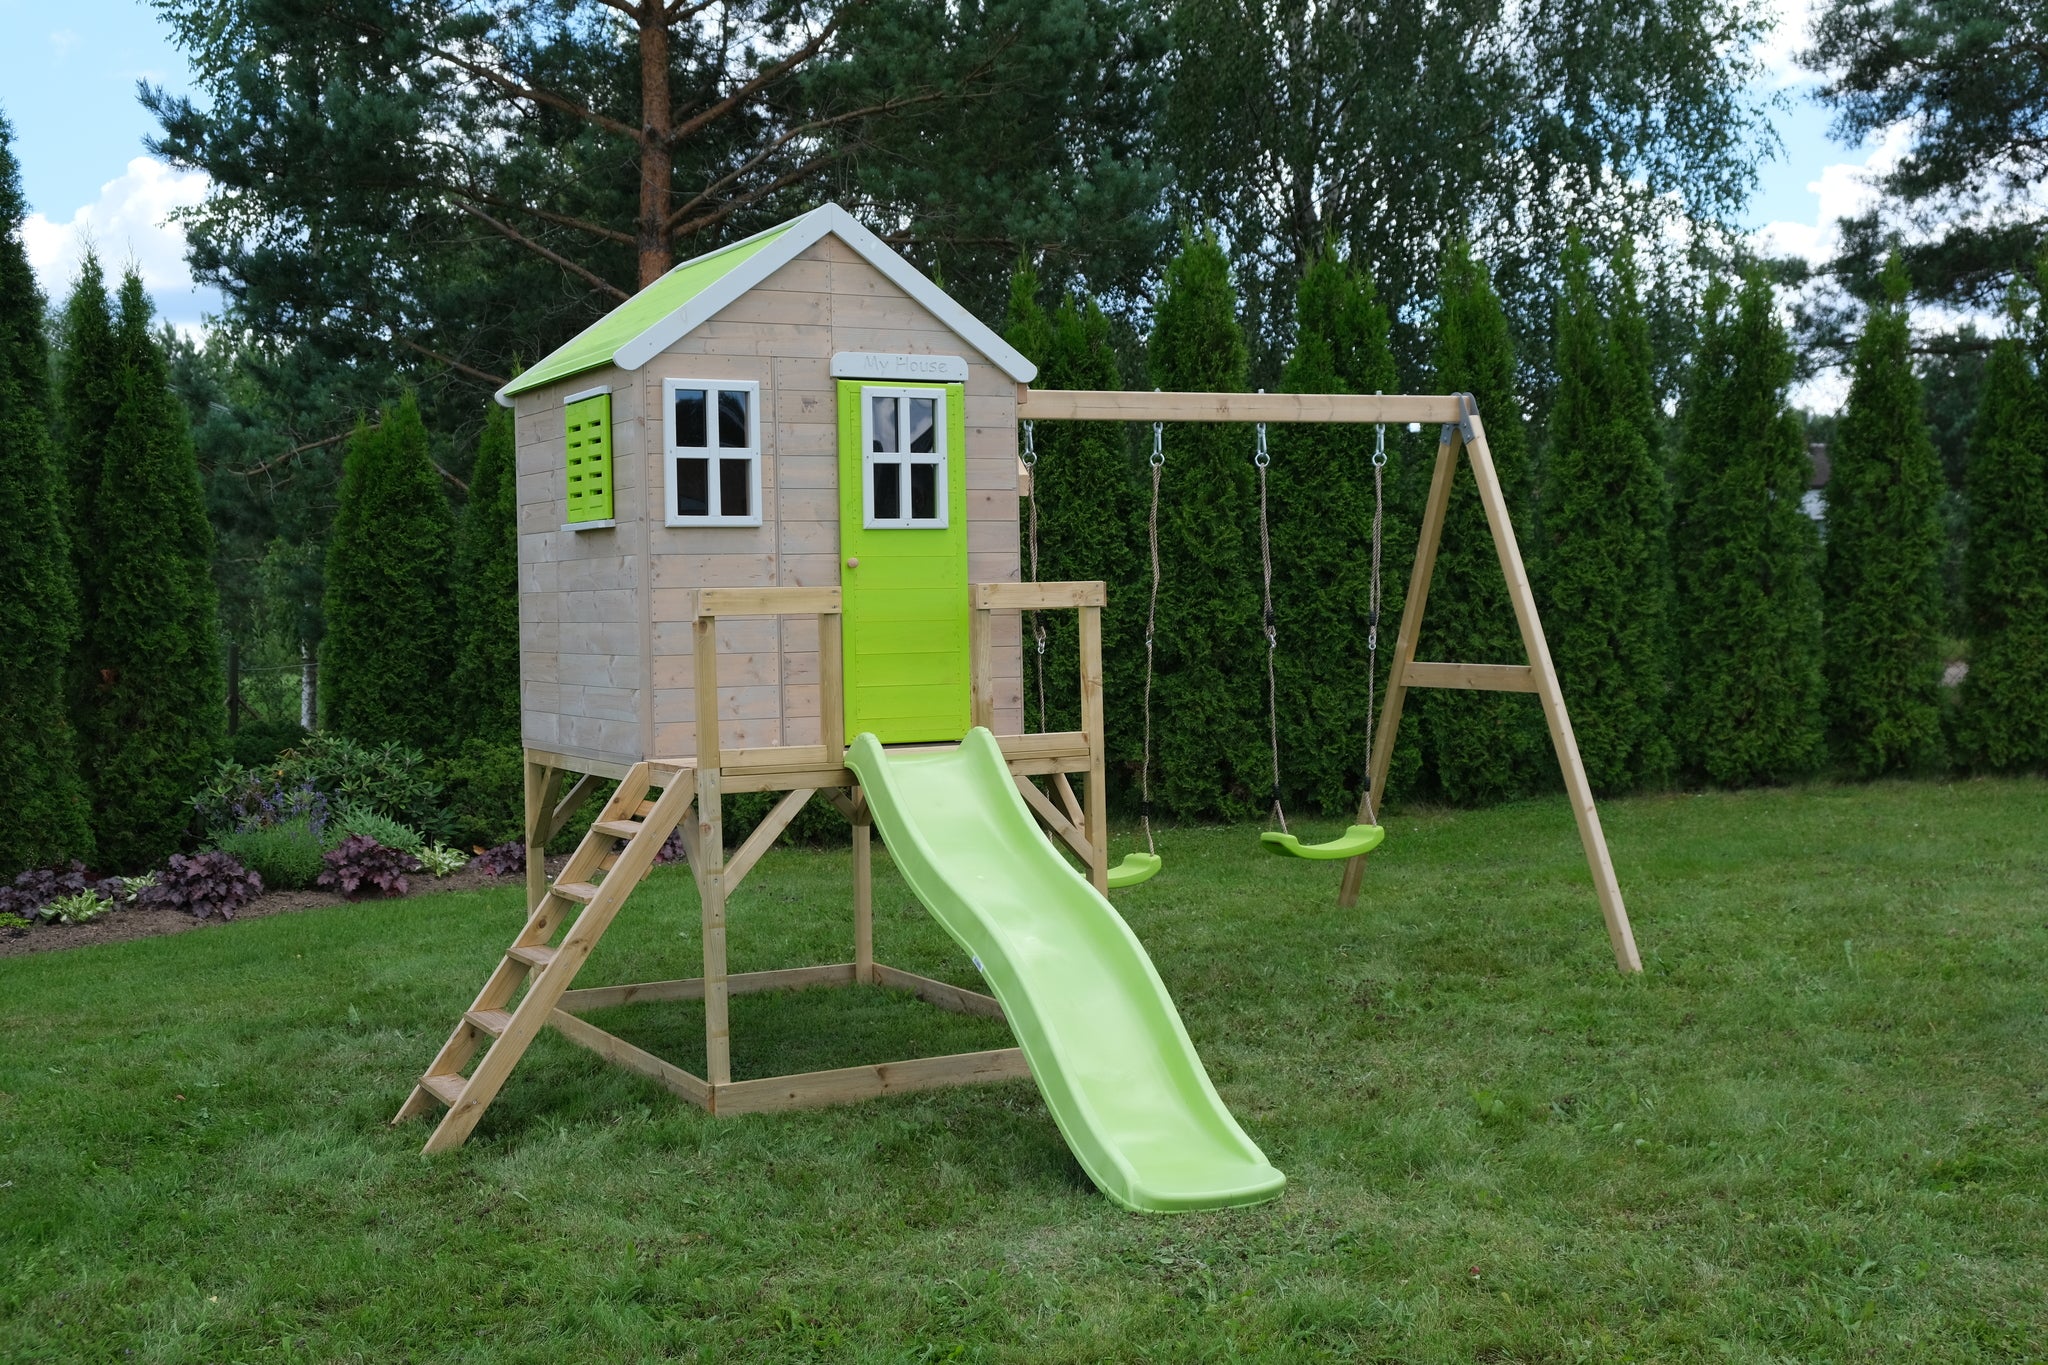 M28-GK My Lodge with Platform, Slide and Double Swing + Gym & Kitchen Attachment